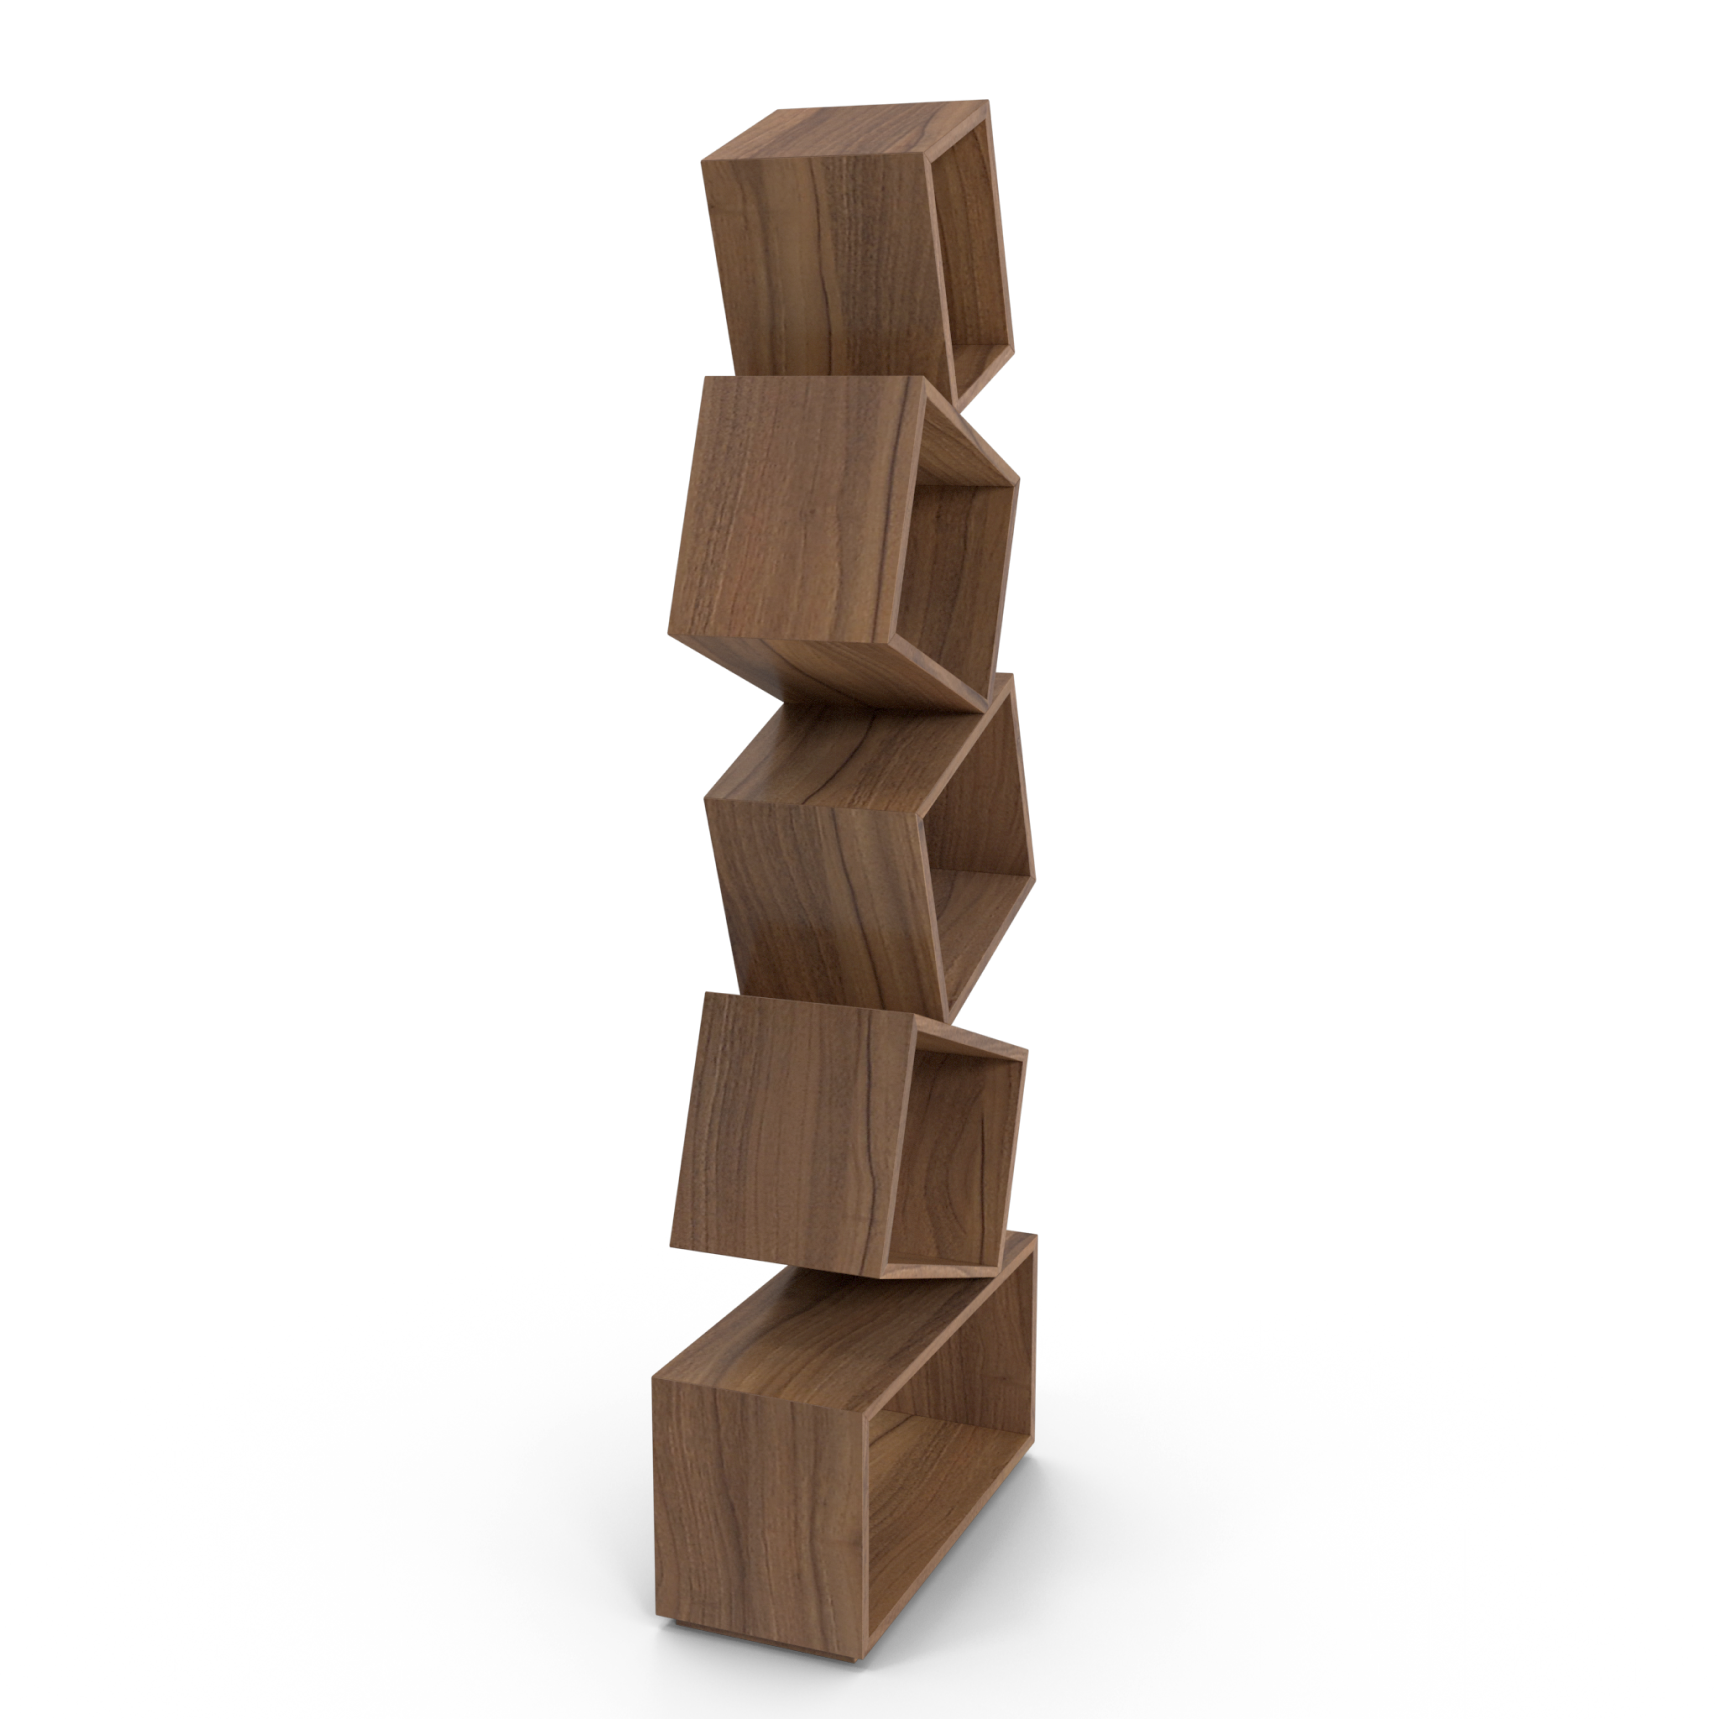 Stacked rotated shelves